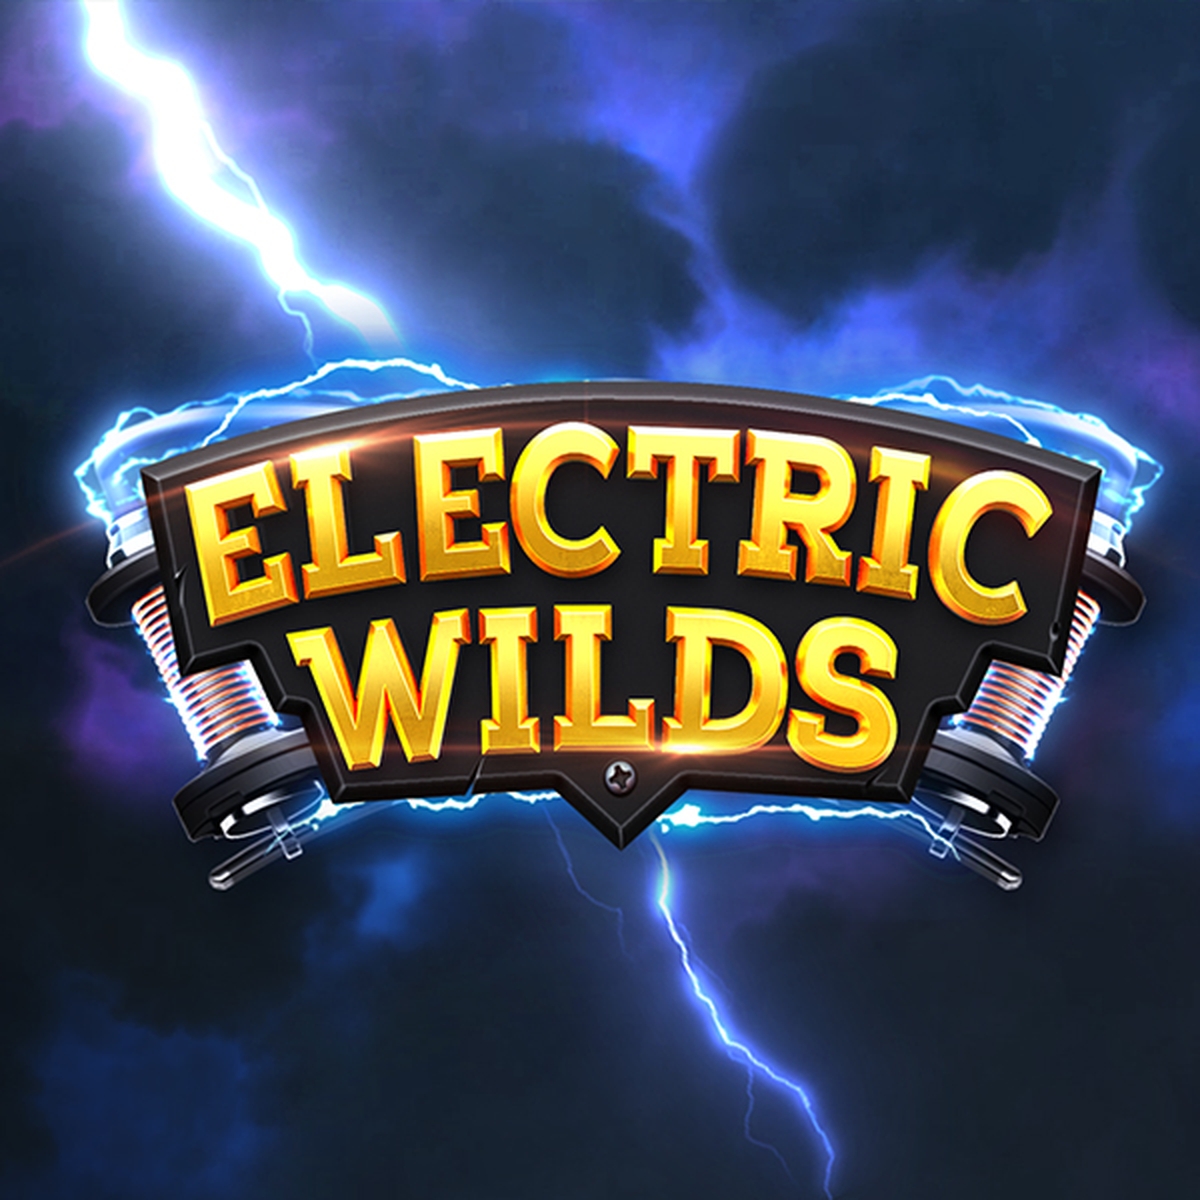 Electric Wilds demo